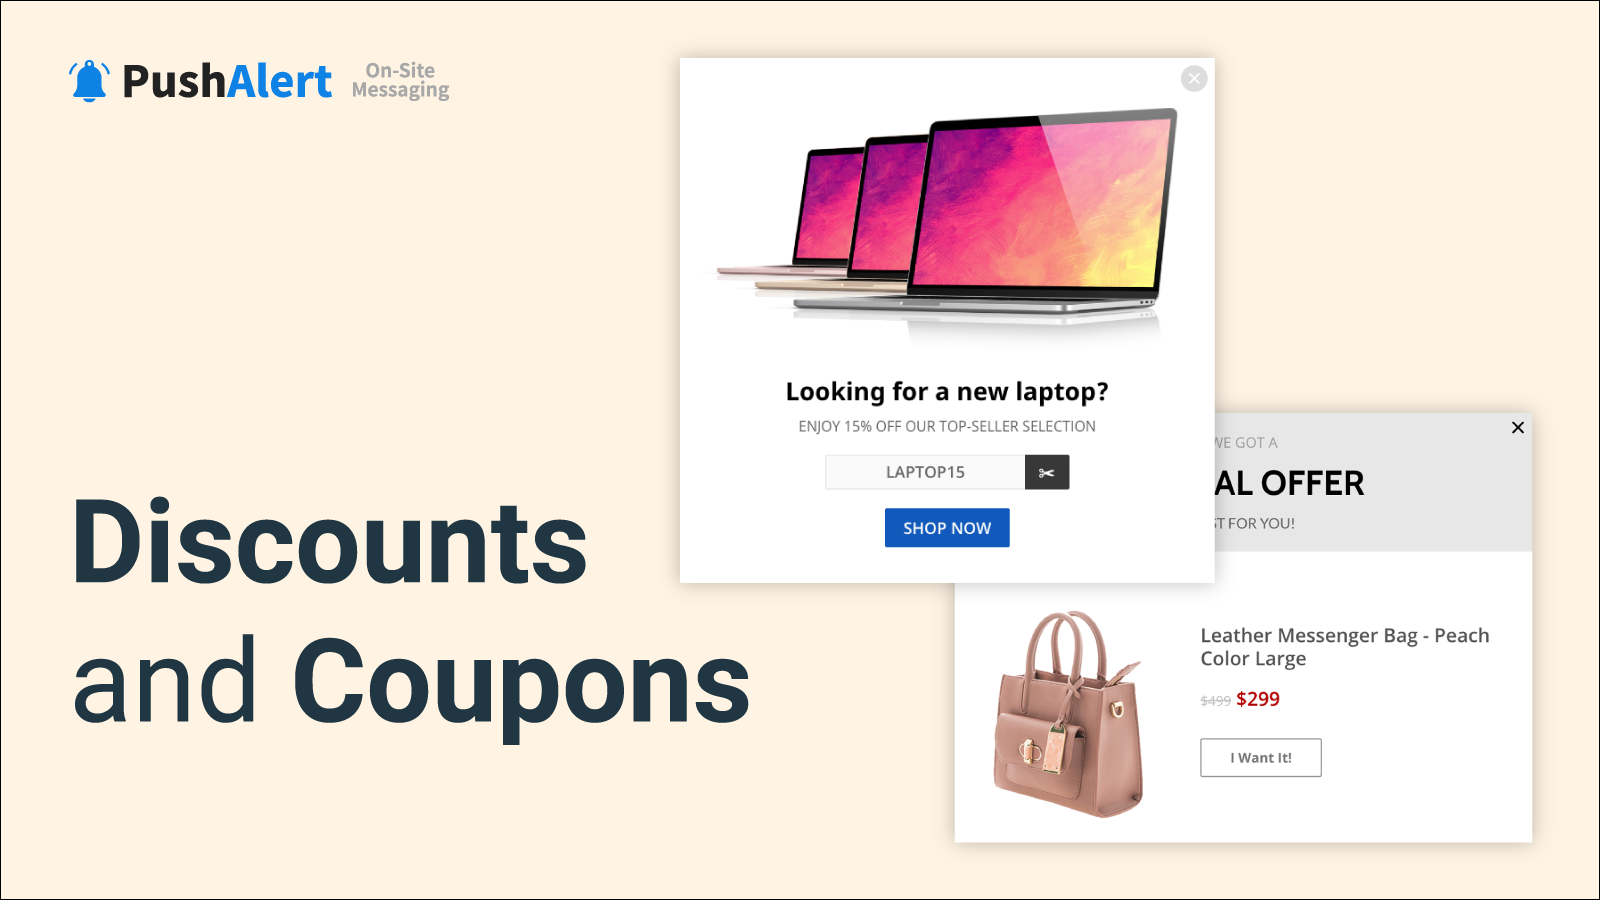 Discount and Coupons